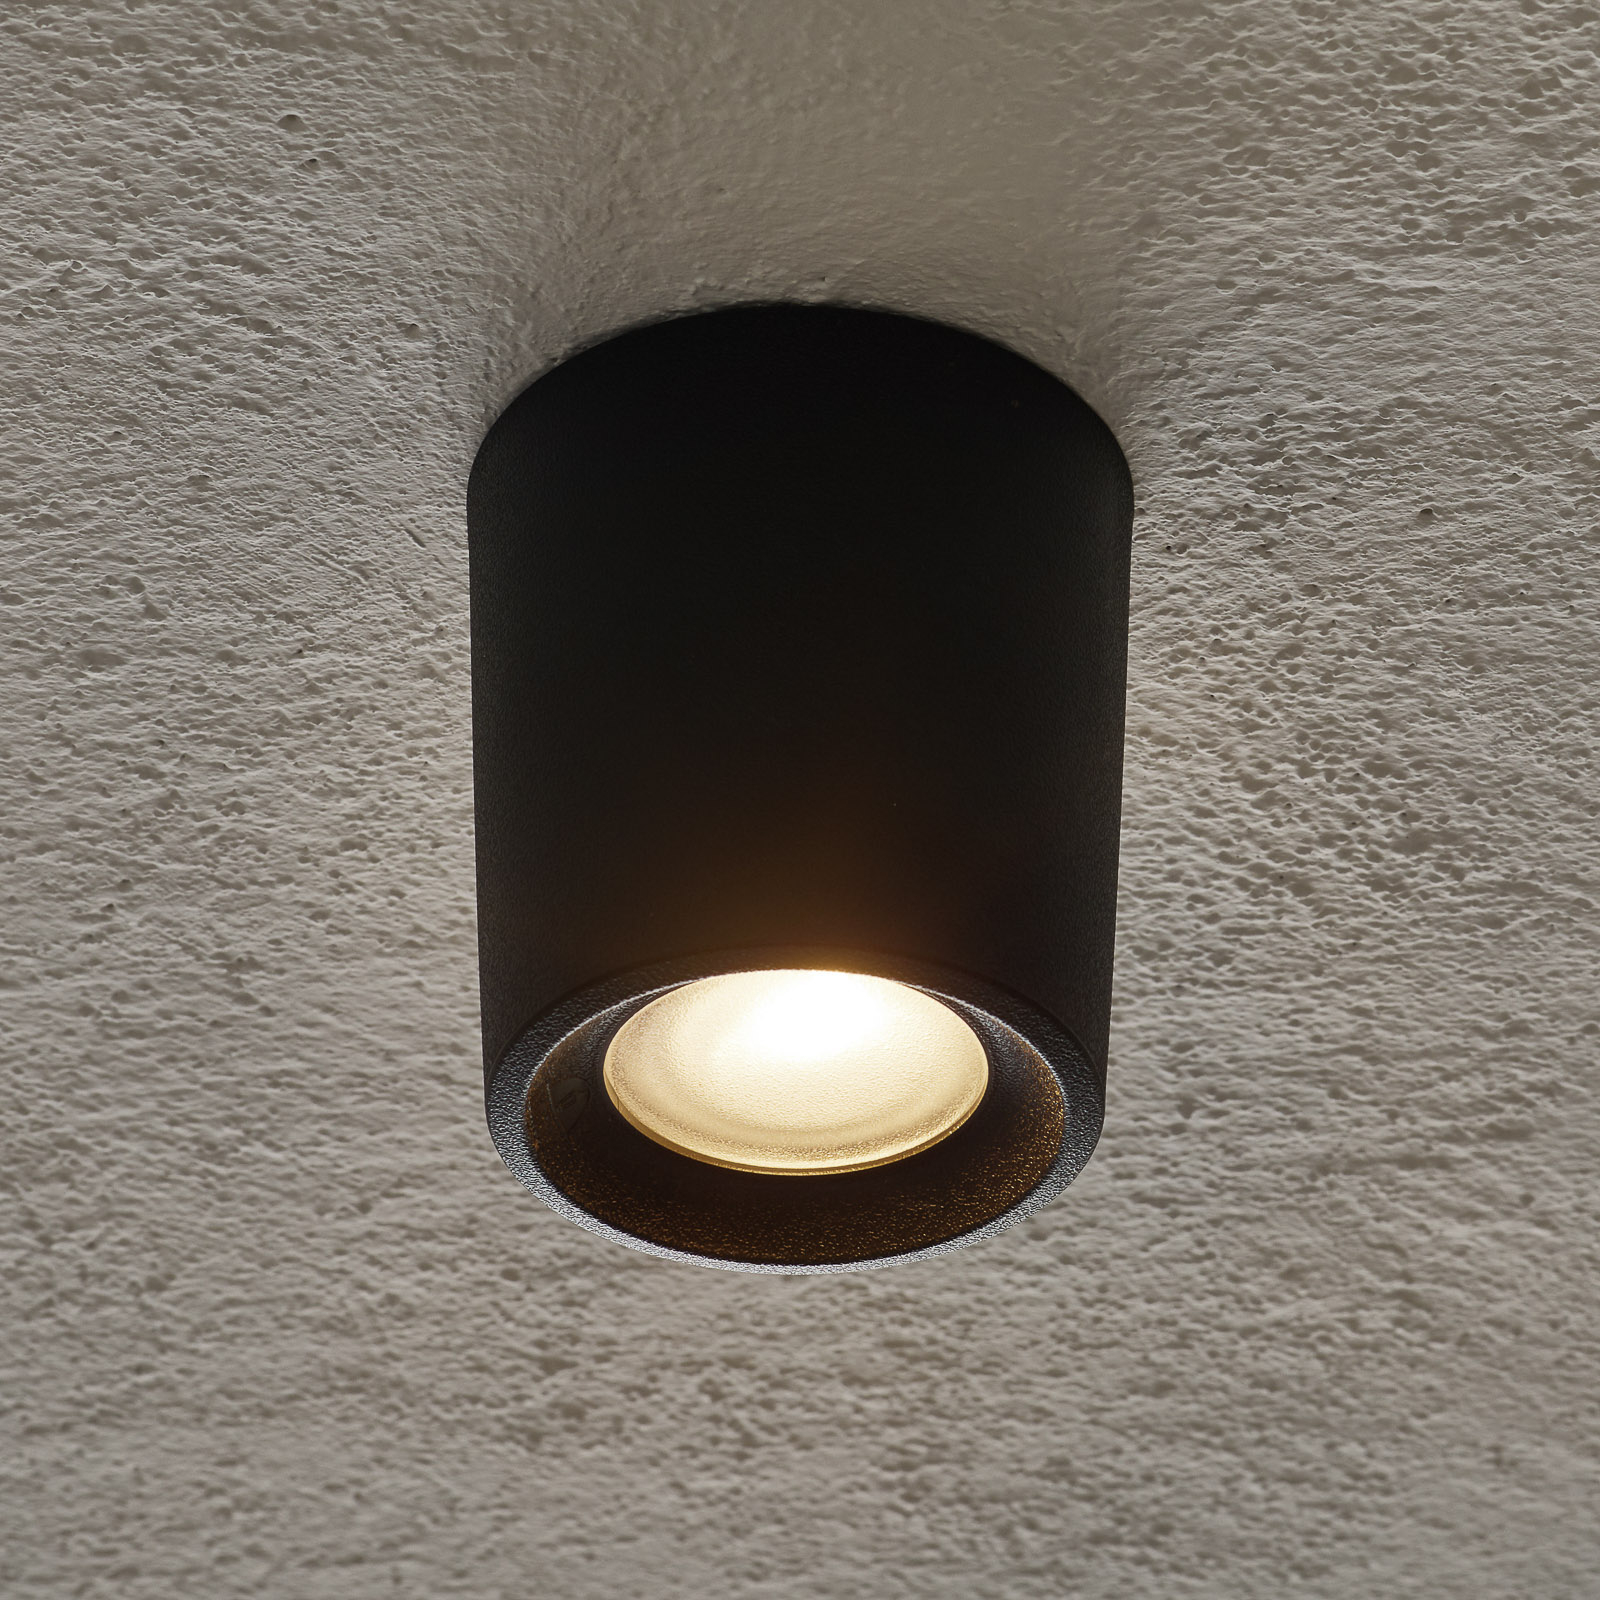 Downlight Livia 9.6 cm black/frosted synthetic resin GU10 CCT